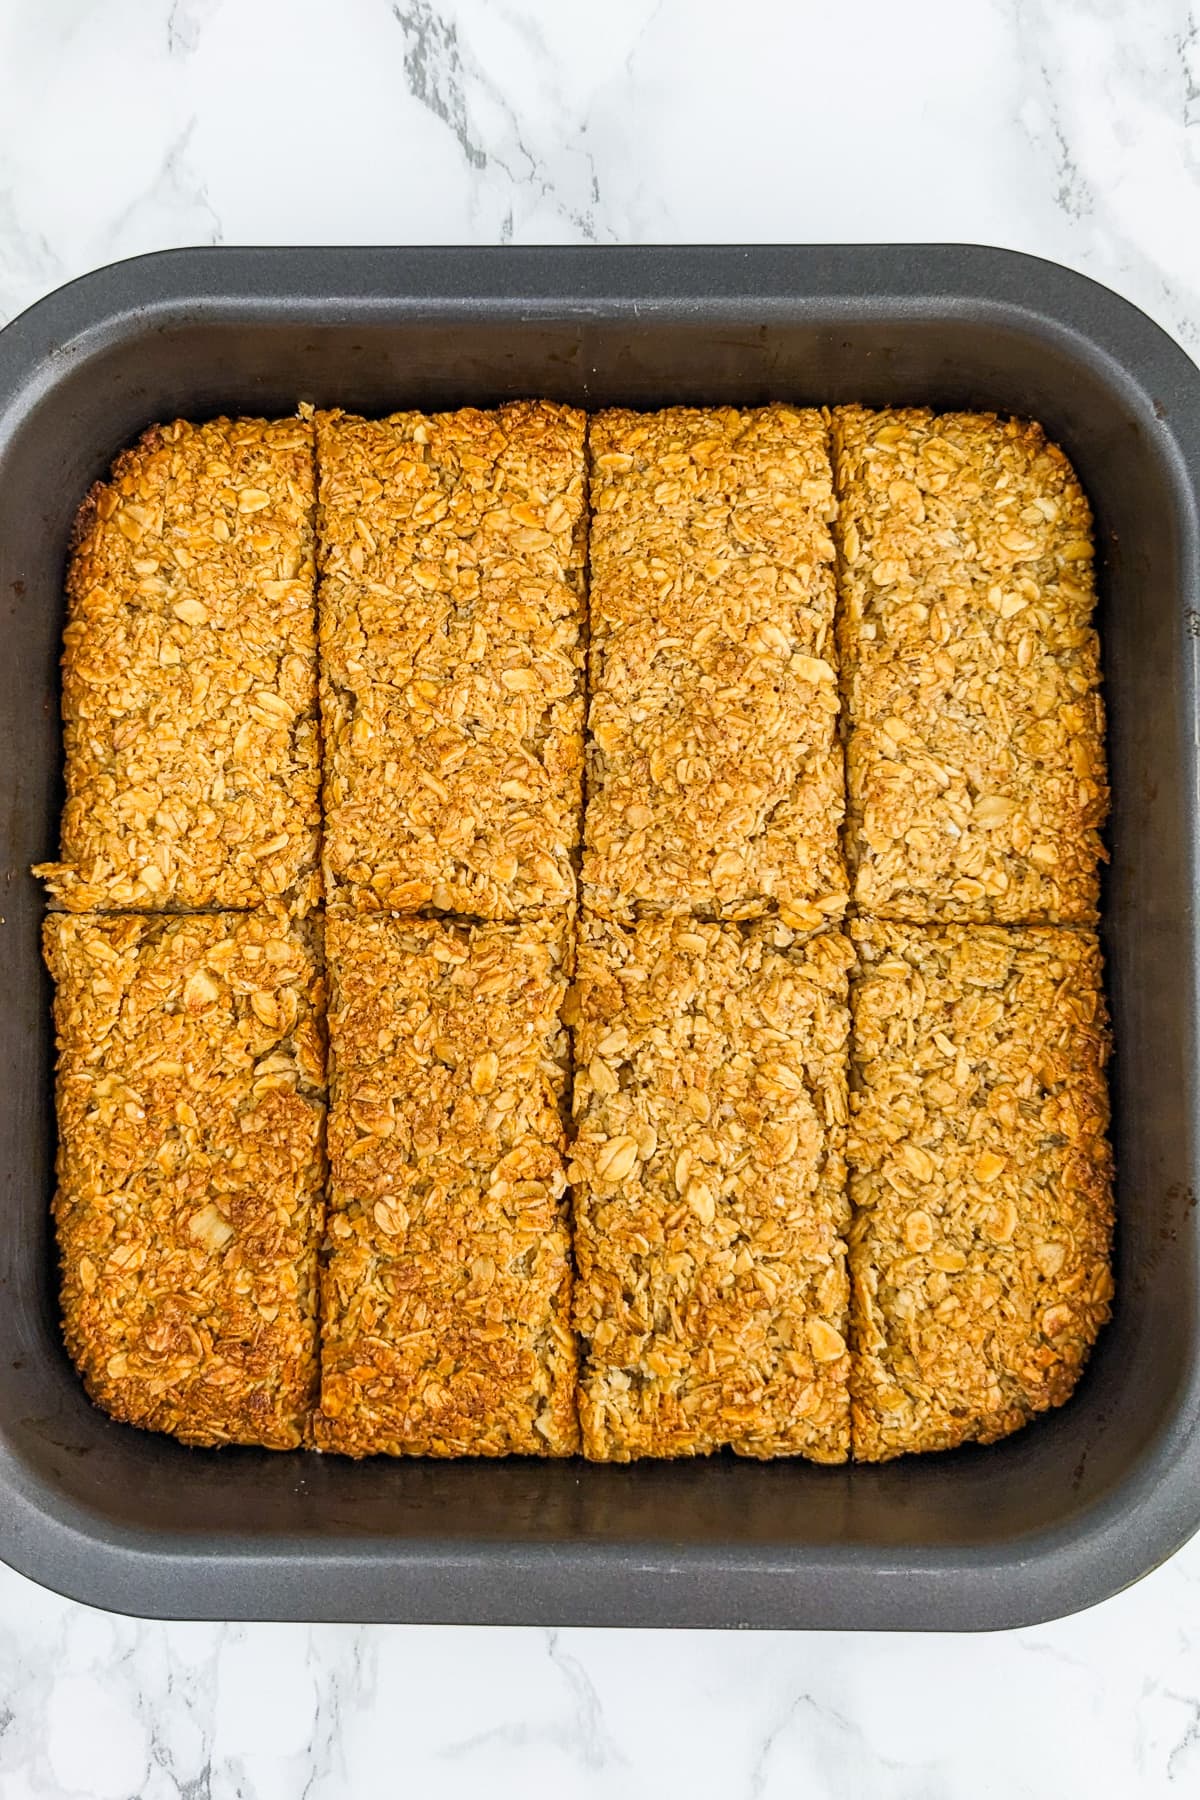 Sliced baked flapjacks in a small square baking tray on a white marble table.